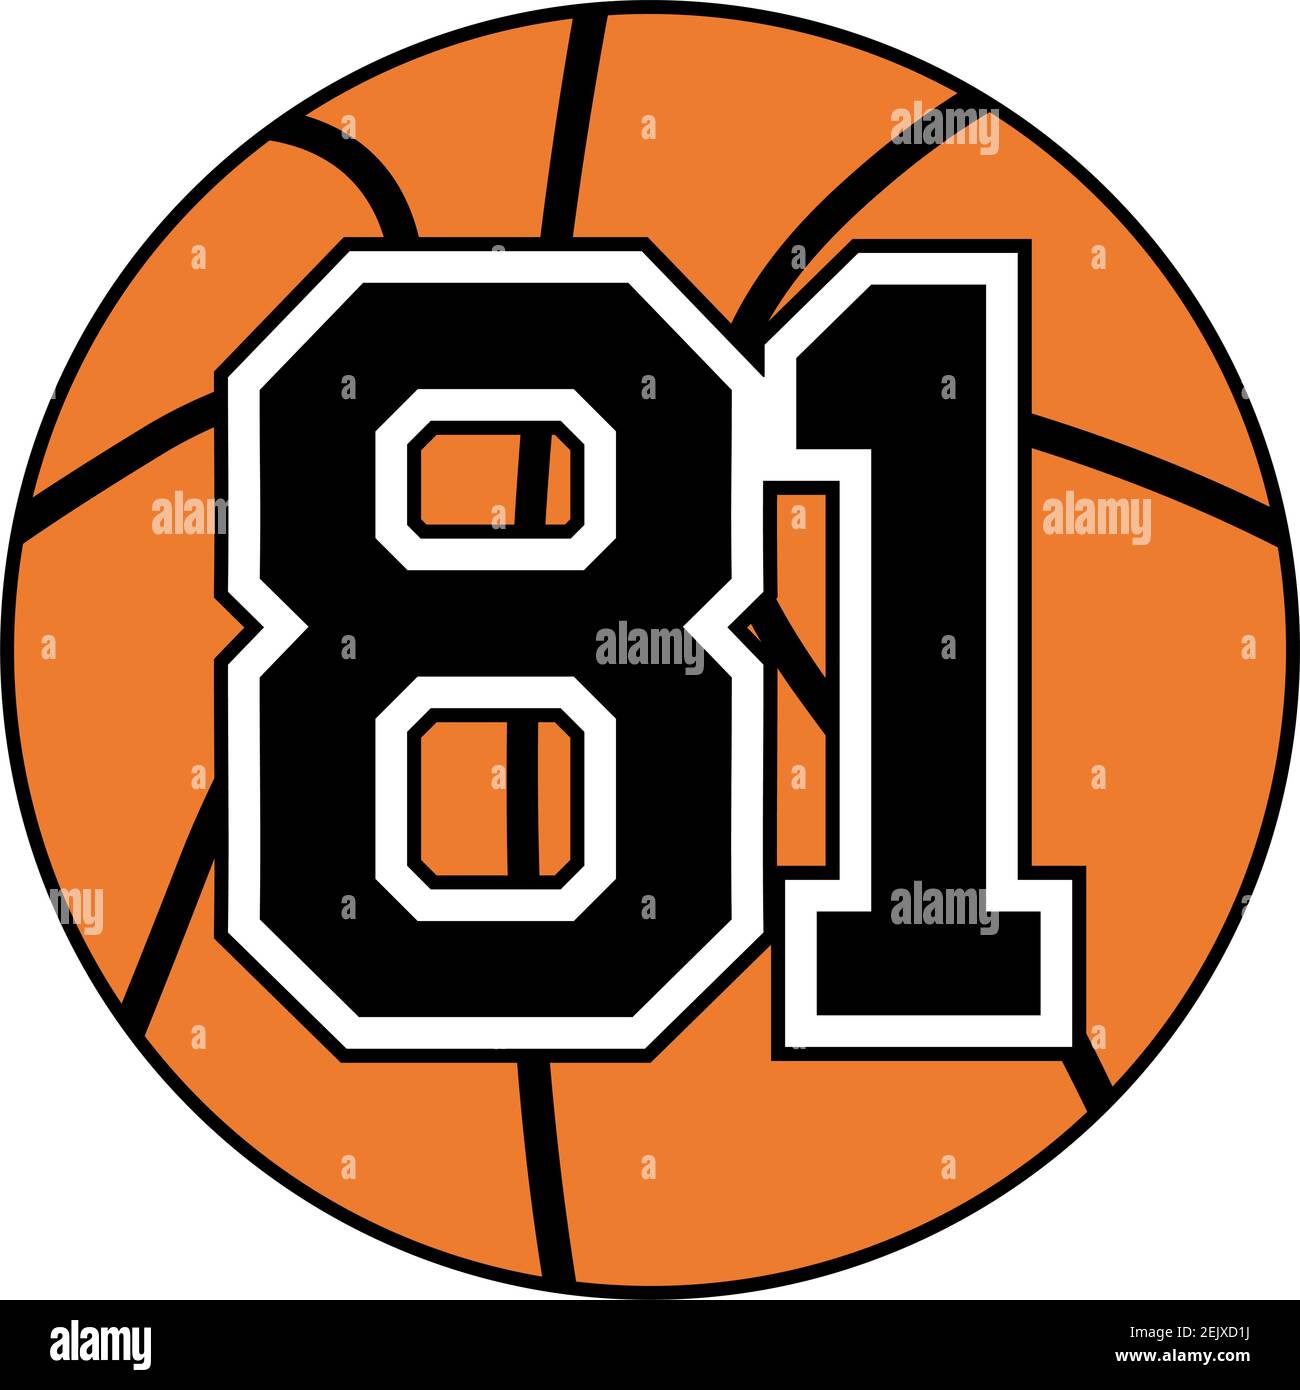 ball of basketball with the number 81 Stock Vector